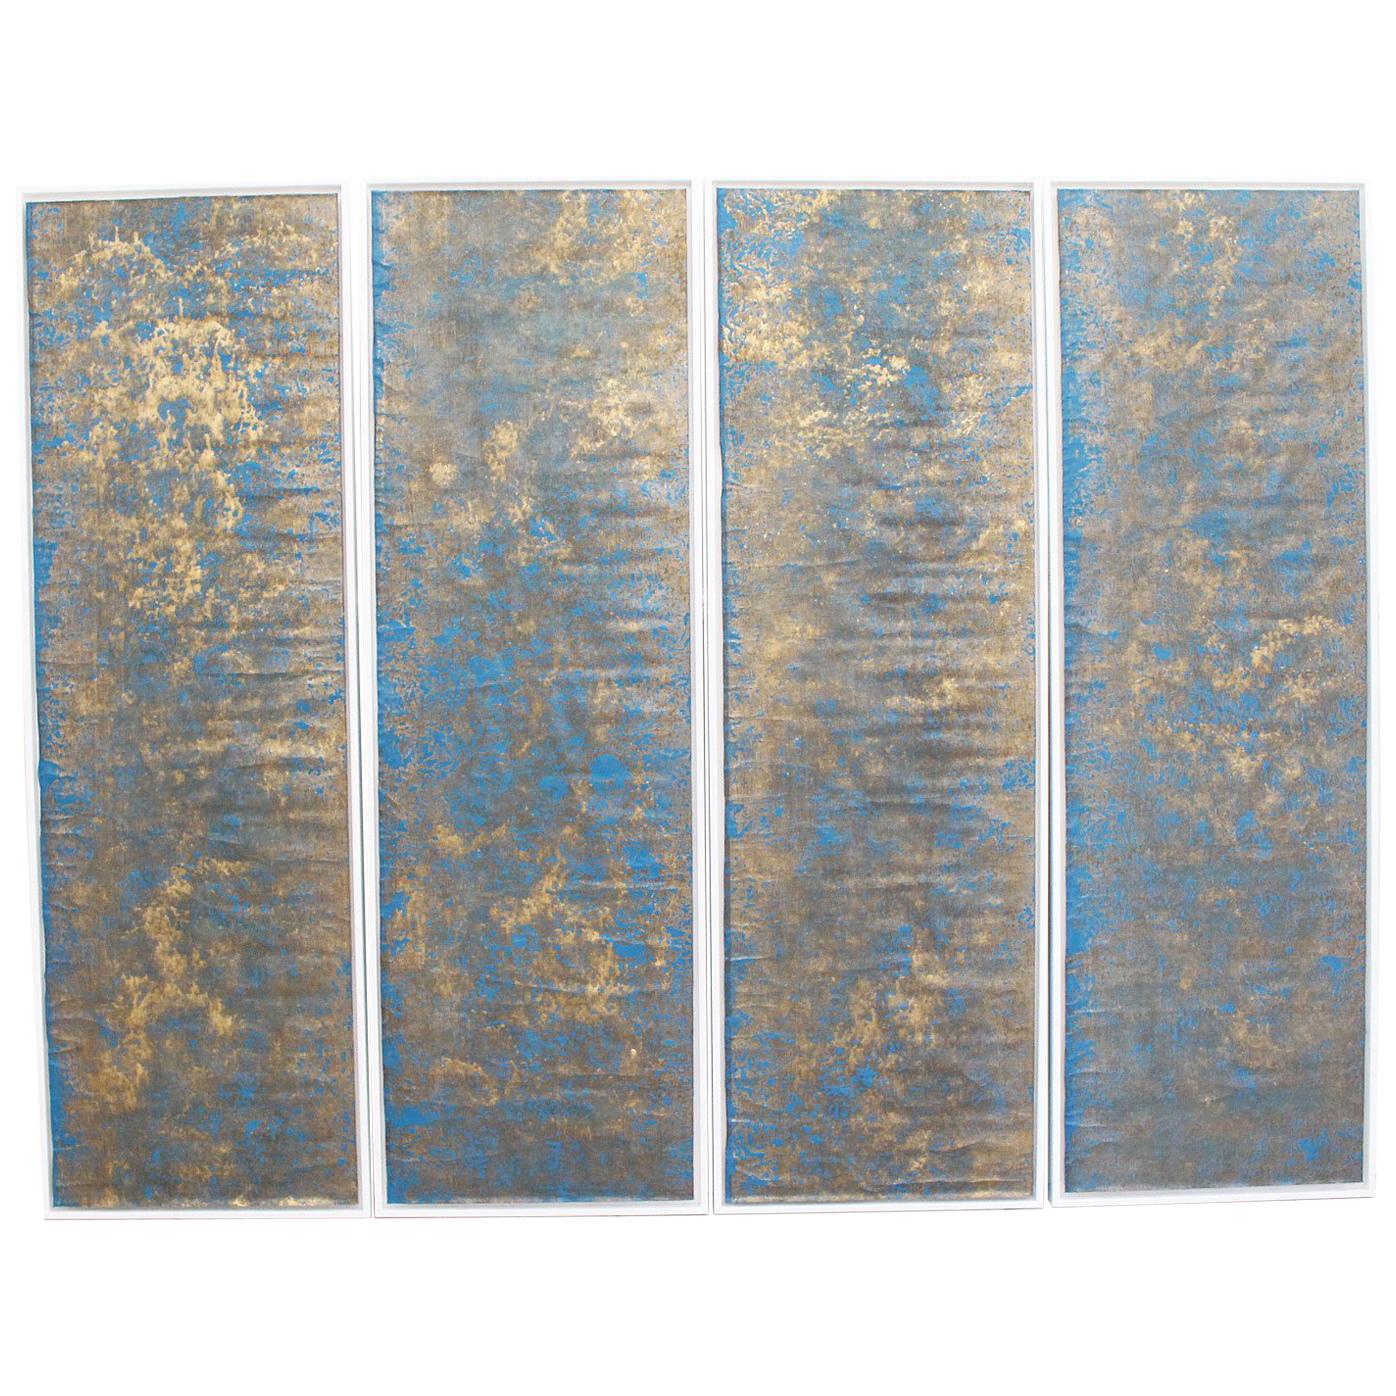 Four 18th Century Hand Gilded and Blue Laminated Wall Covering Panels